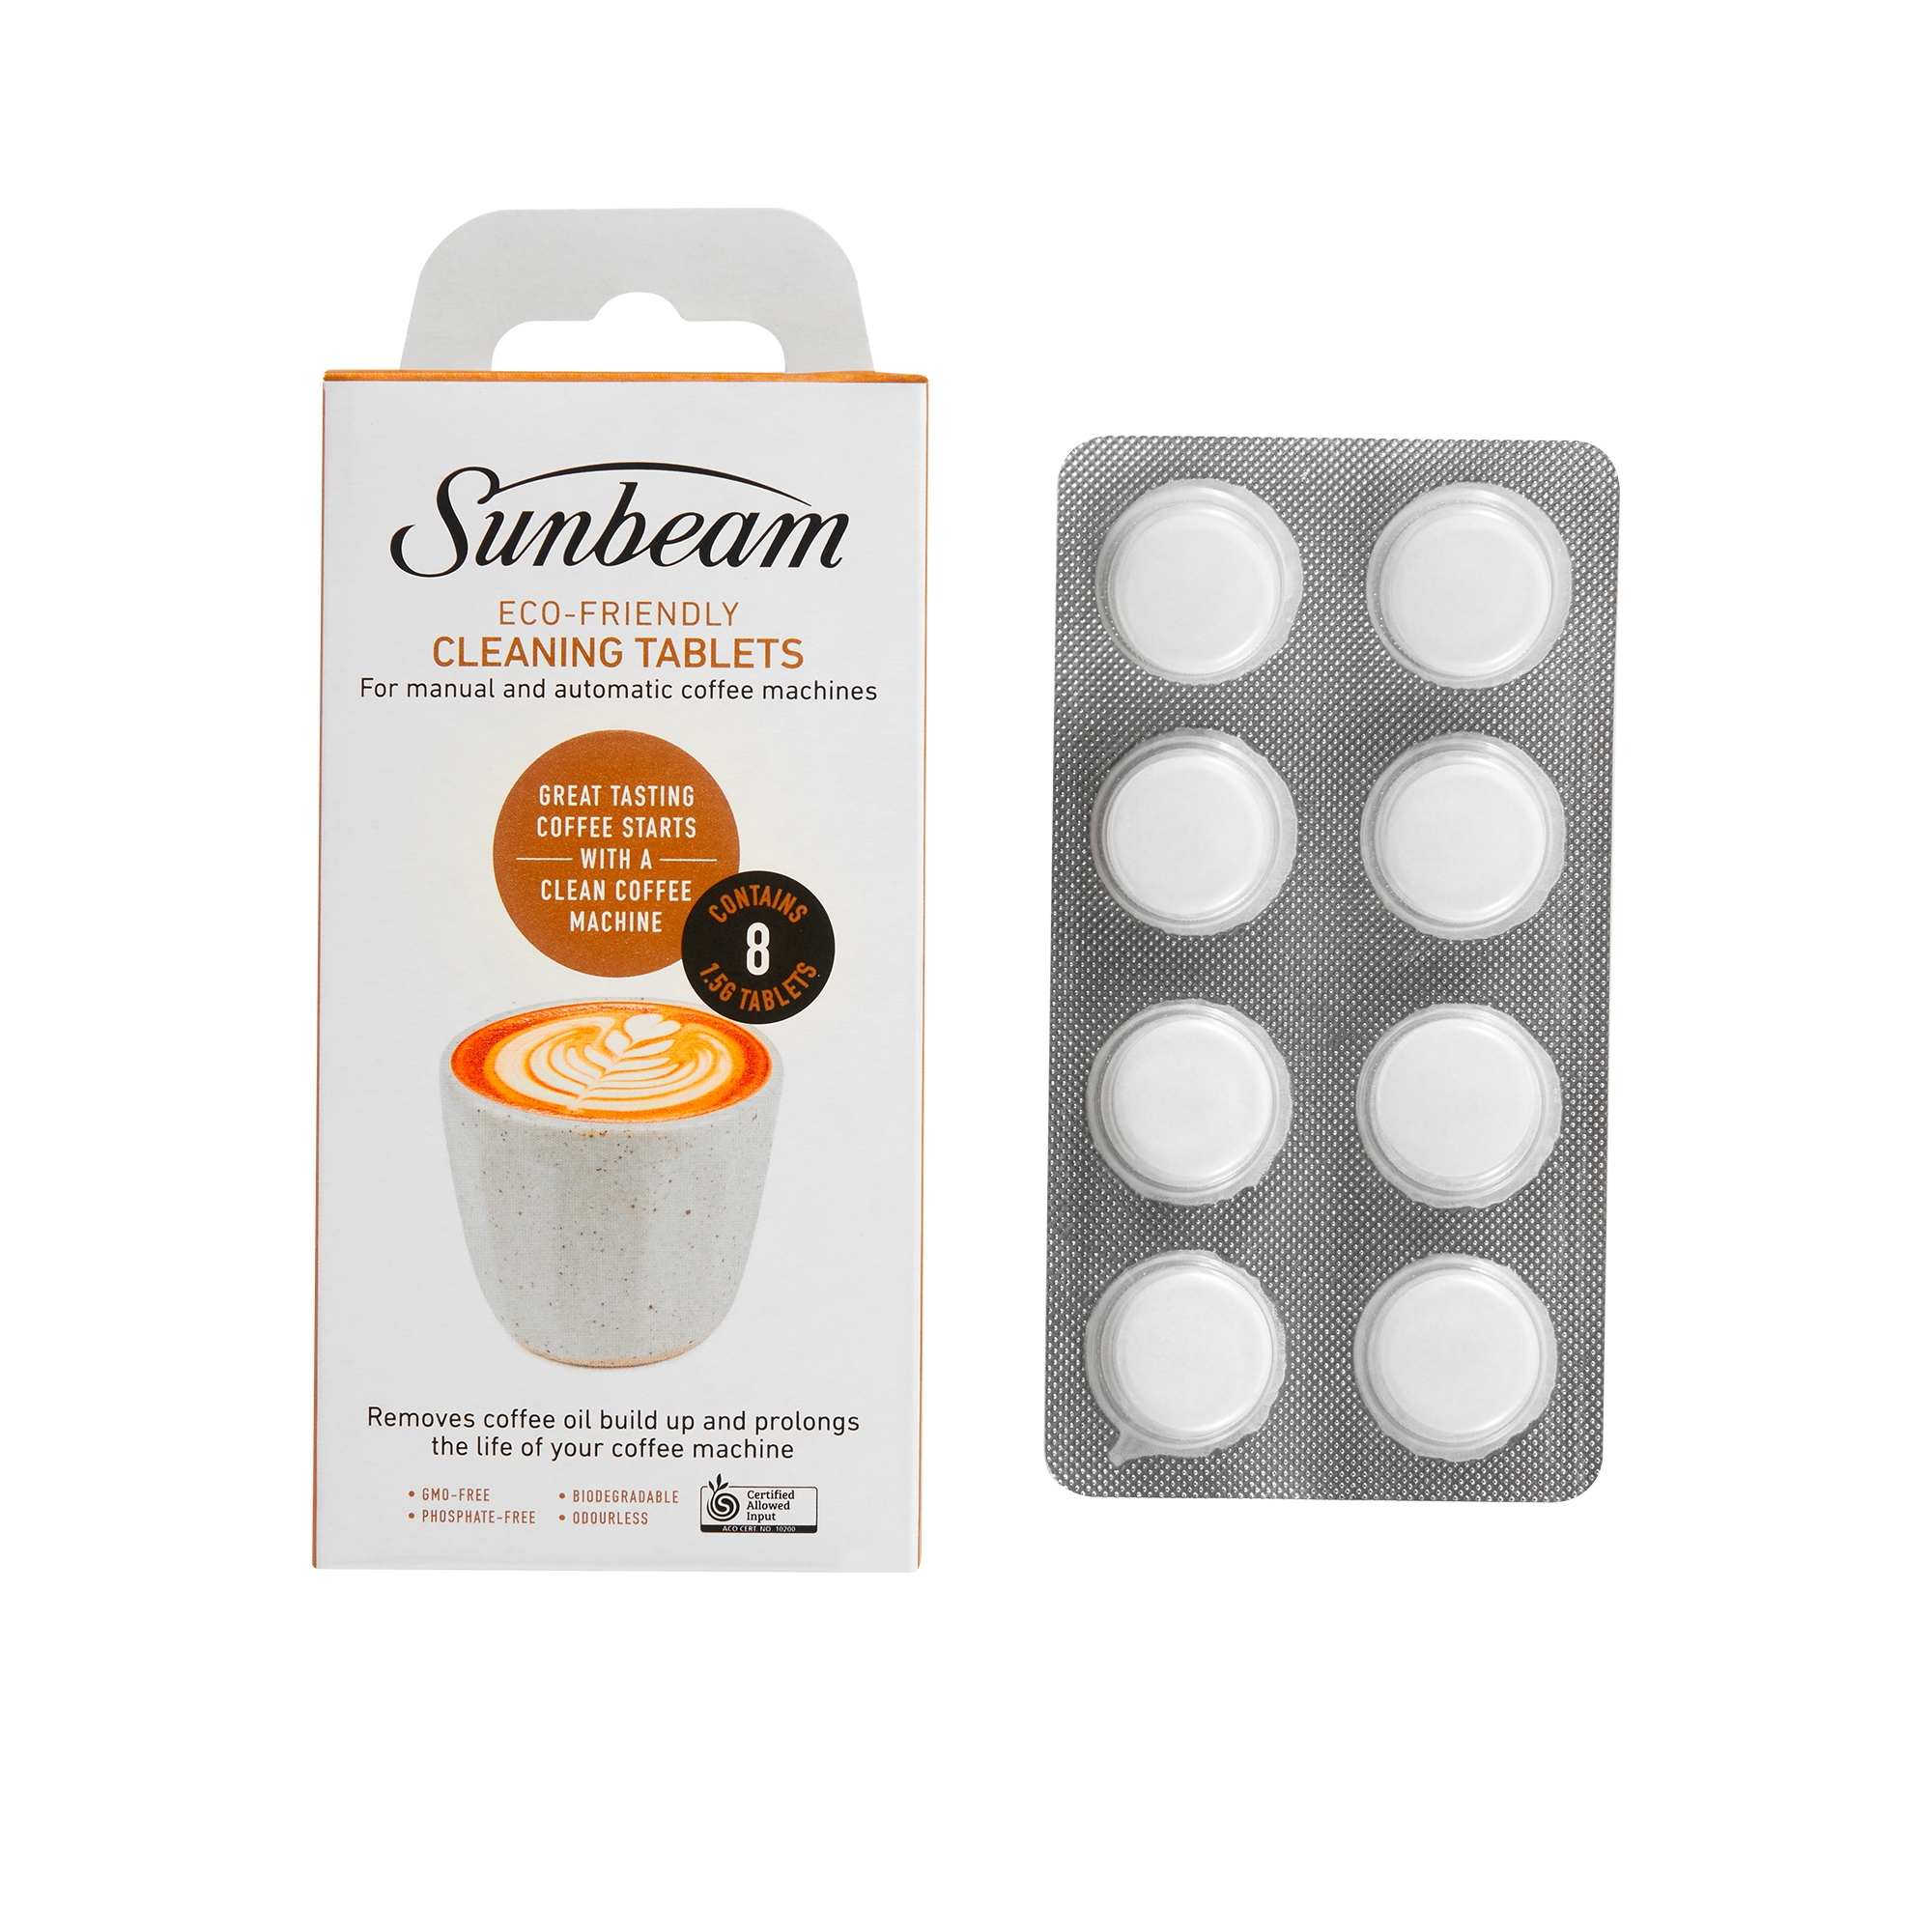 Sunbeam Espresso Machine Cleaning Tablets Set of 8 Image 1